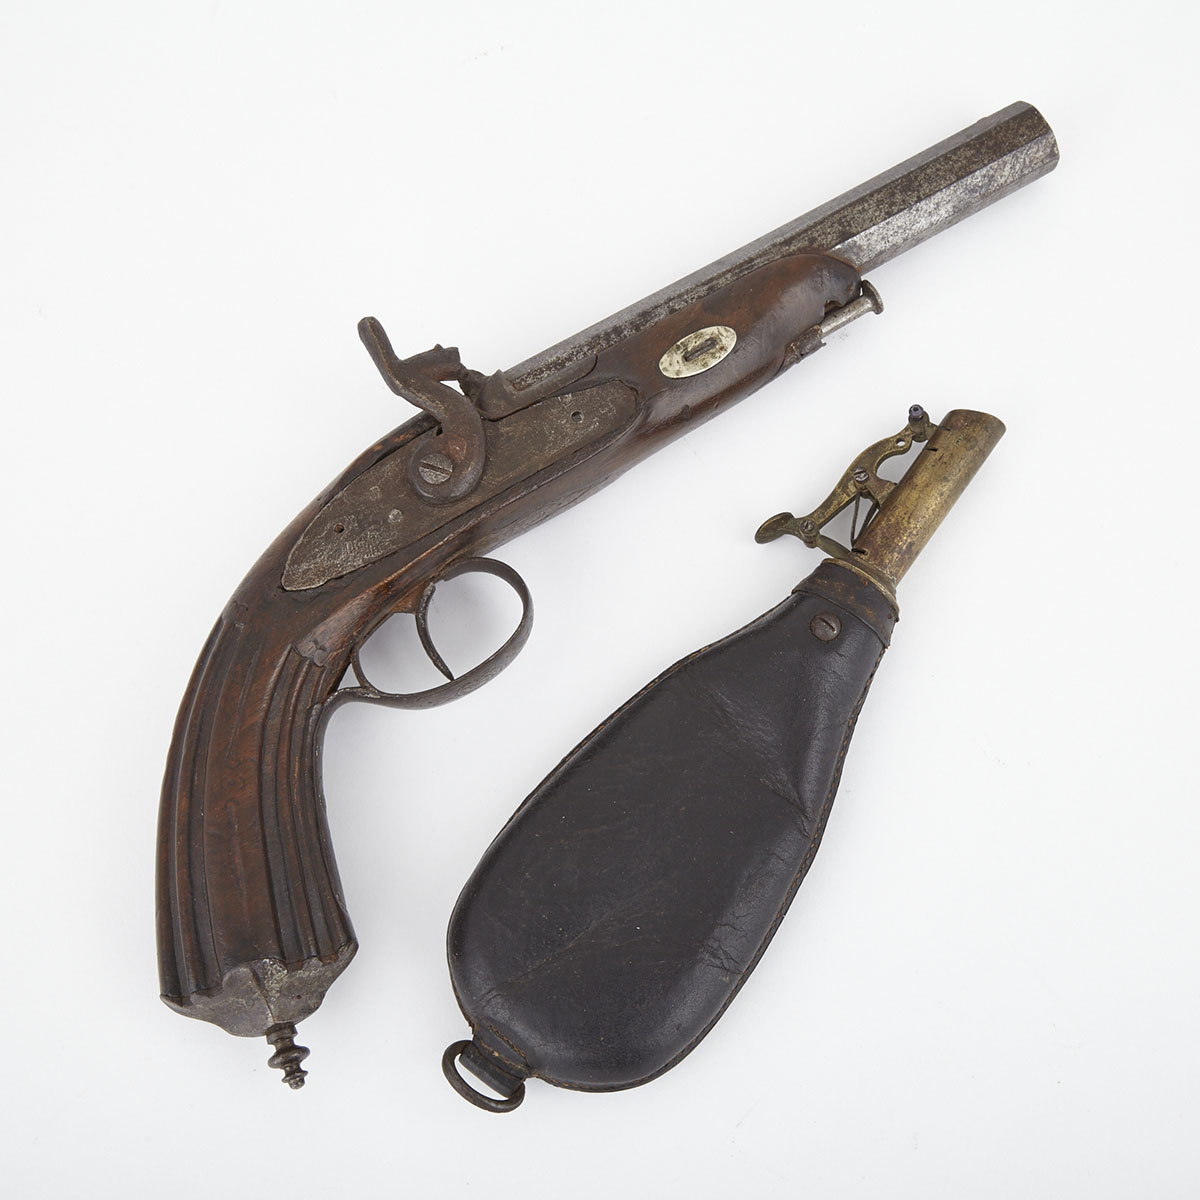 Replica of a Continental 18th century Flintlock Pistol, 20th century, together with a 19th century leather powder flask